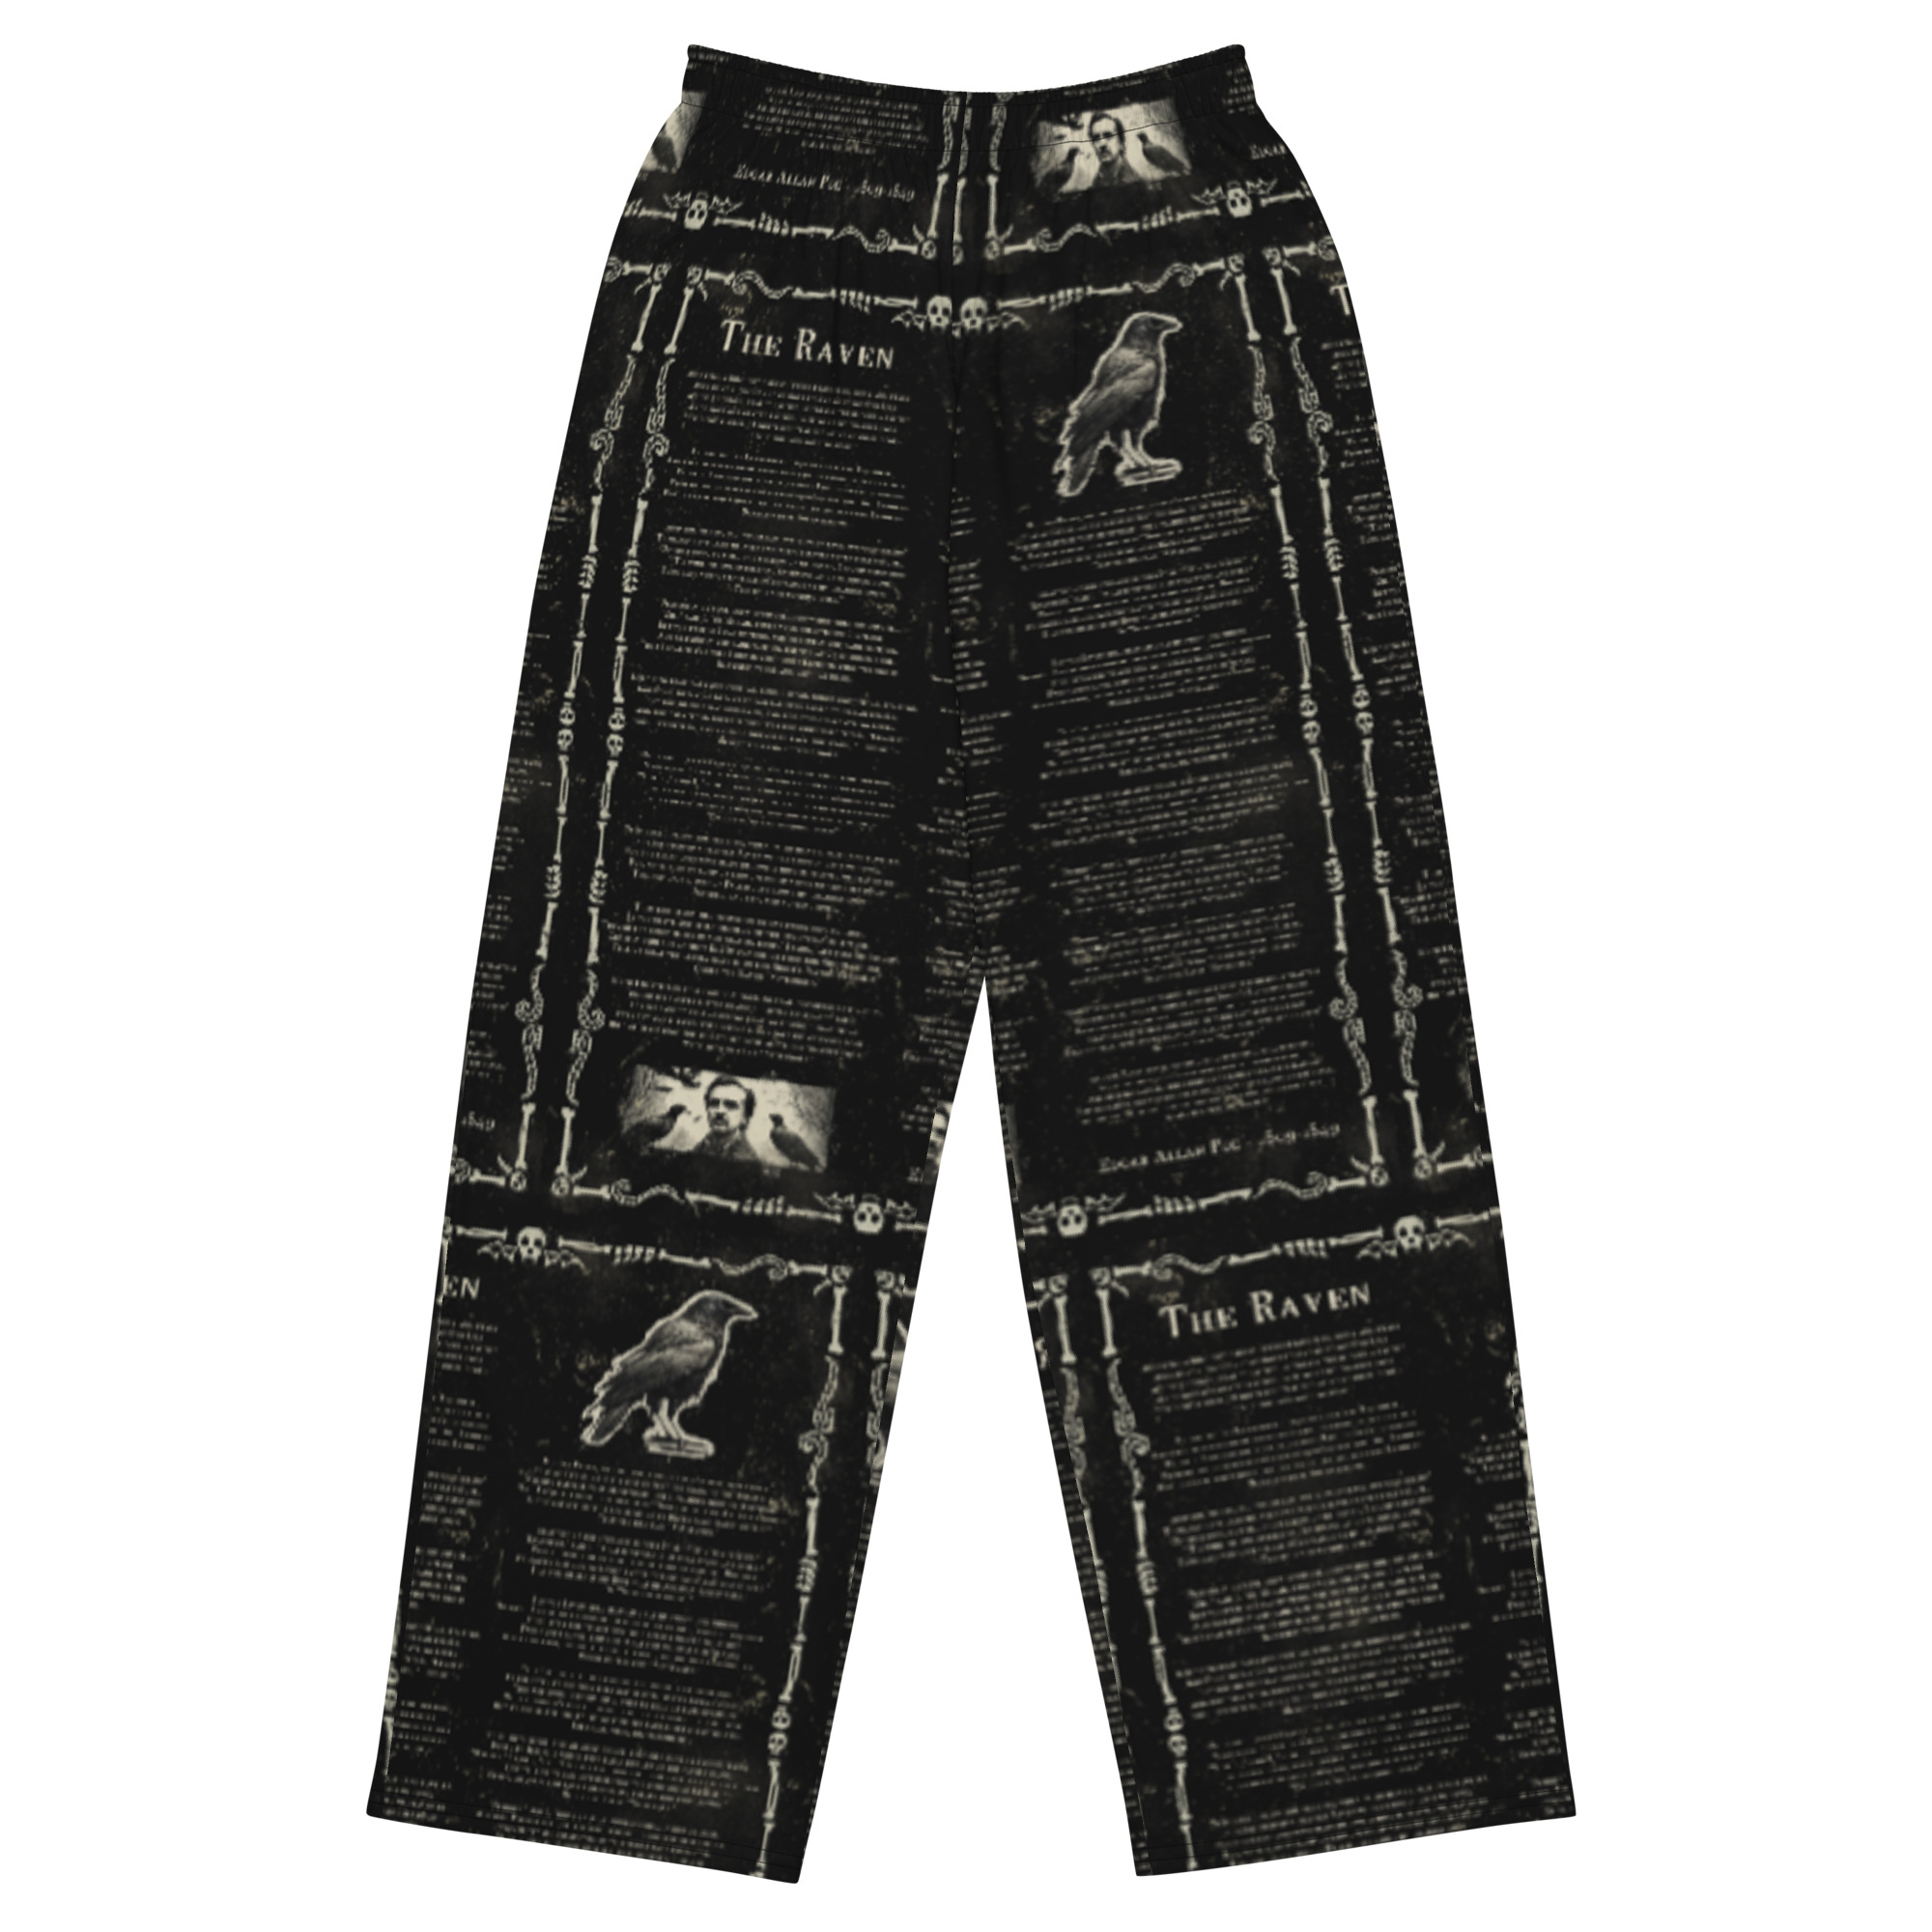 Featured image for “The Raven - Edgar Allan Poe - All-over print unisex wide-leg pants”